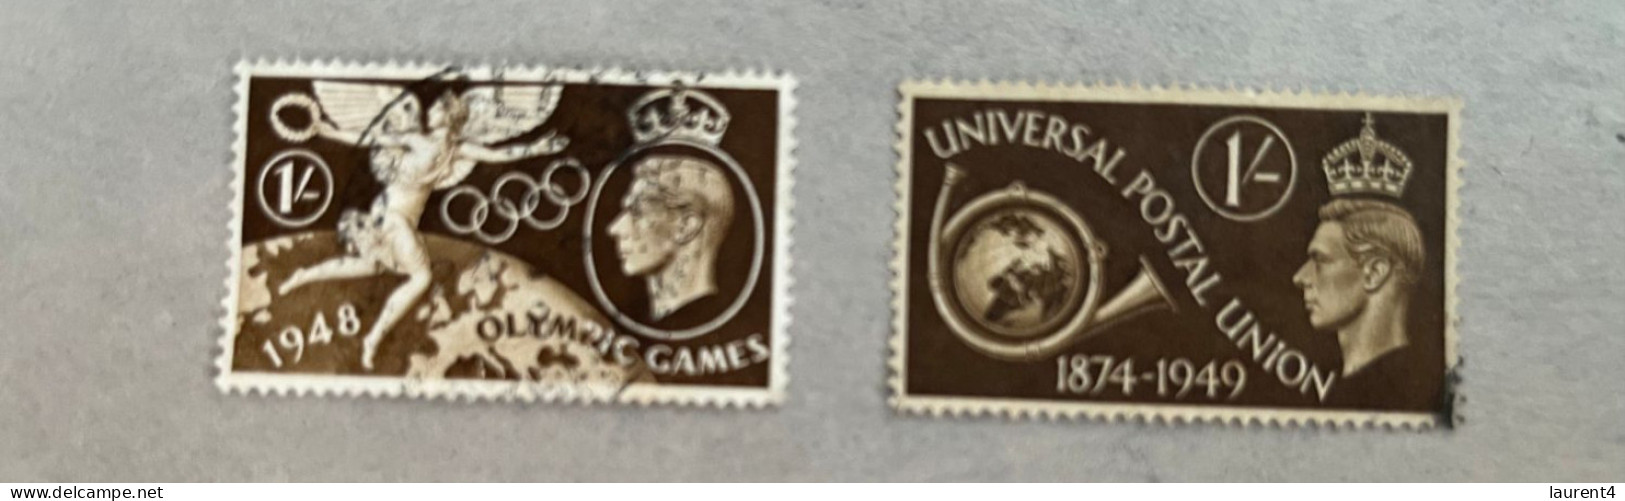 13-8-2023 (stamp) Selection Of 2 UK 1948 (higher Values) Olympic Used Stamps + UPU (1949) - Summer 1948: London